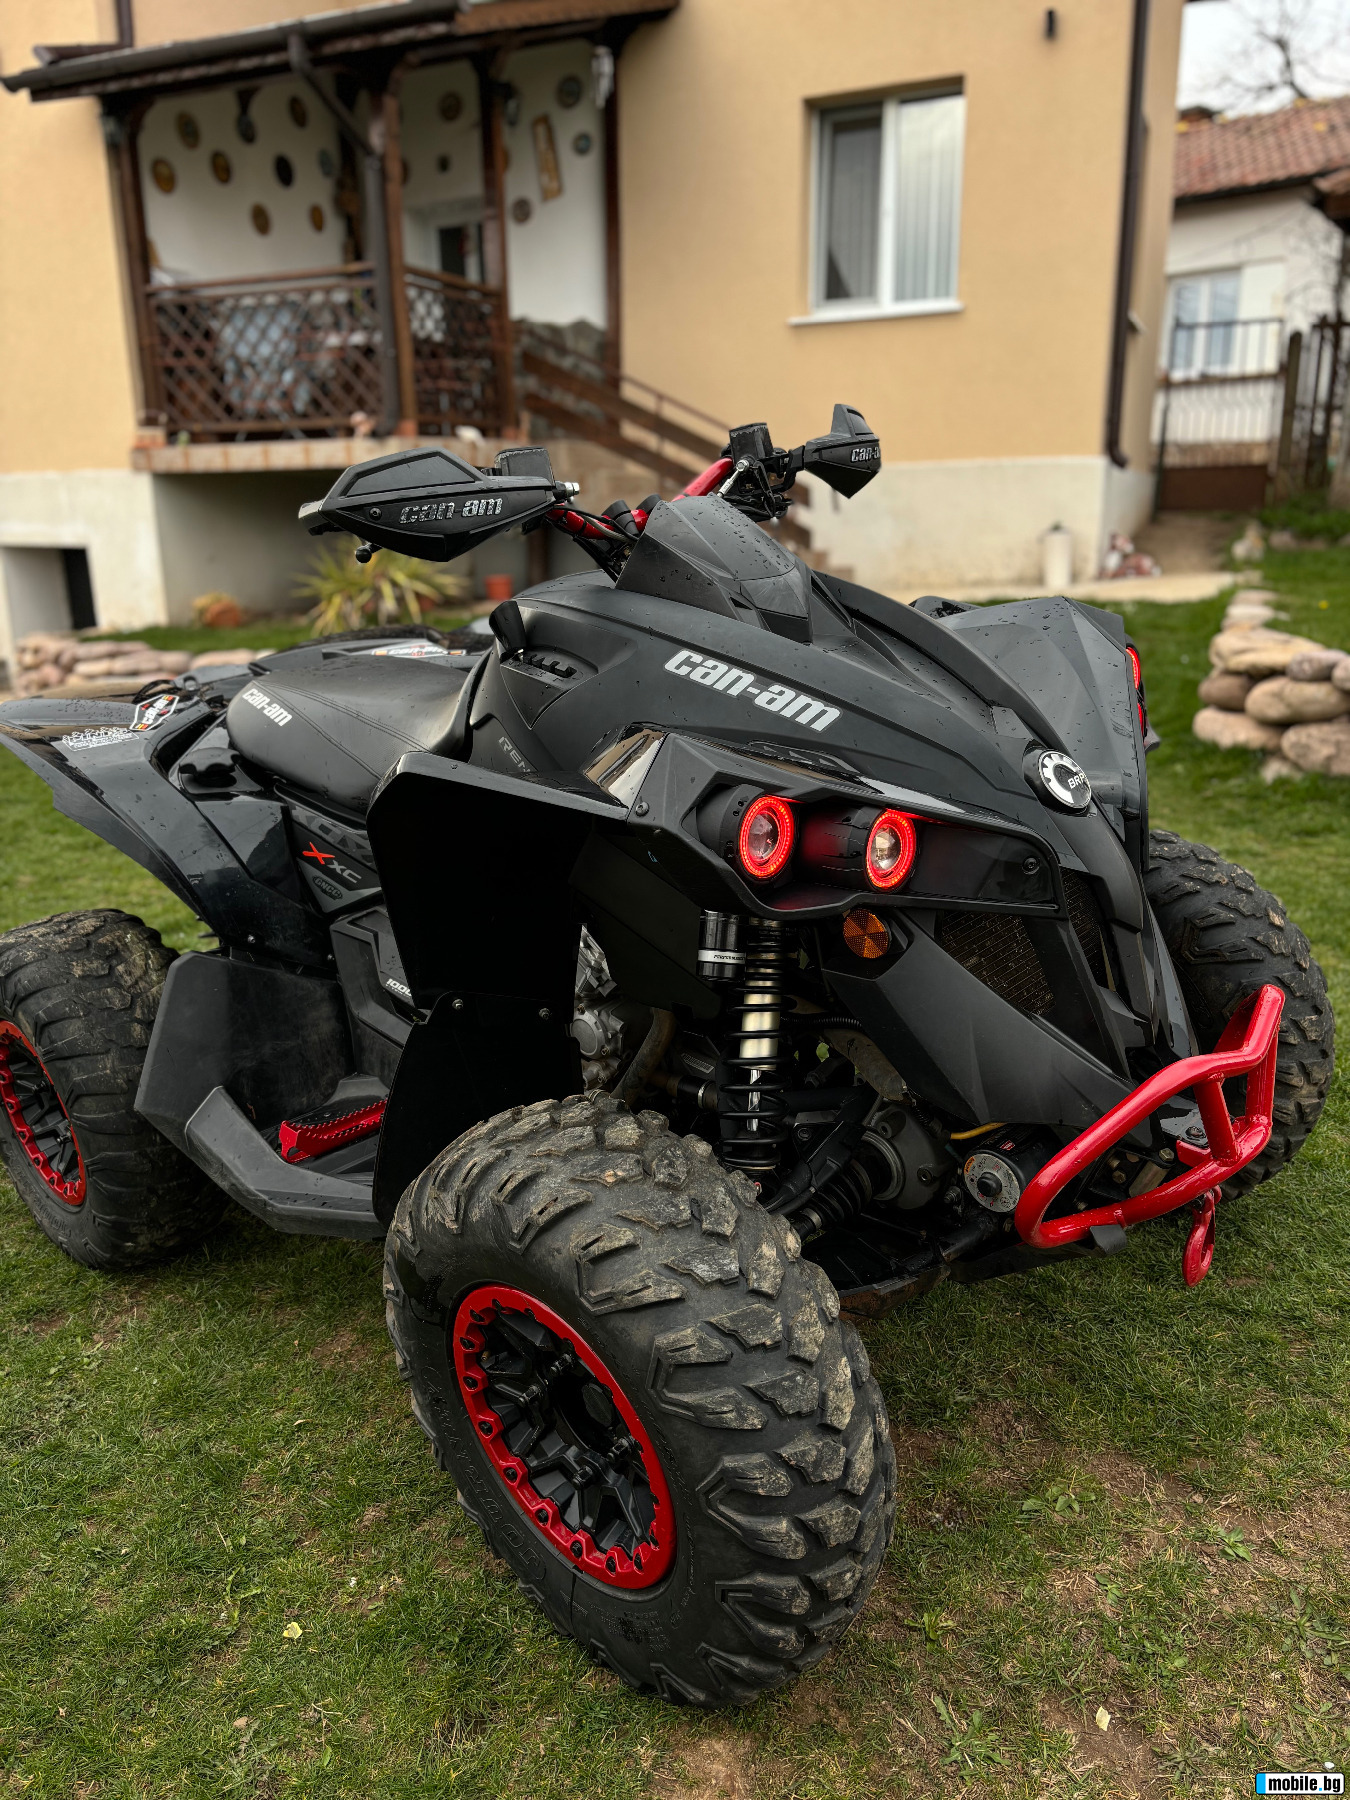 Can-Am Rengade 1000R Xxc | Mobile.bg   6